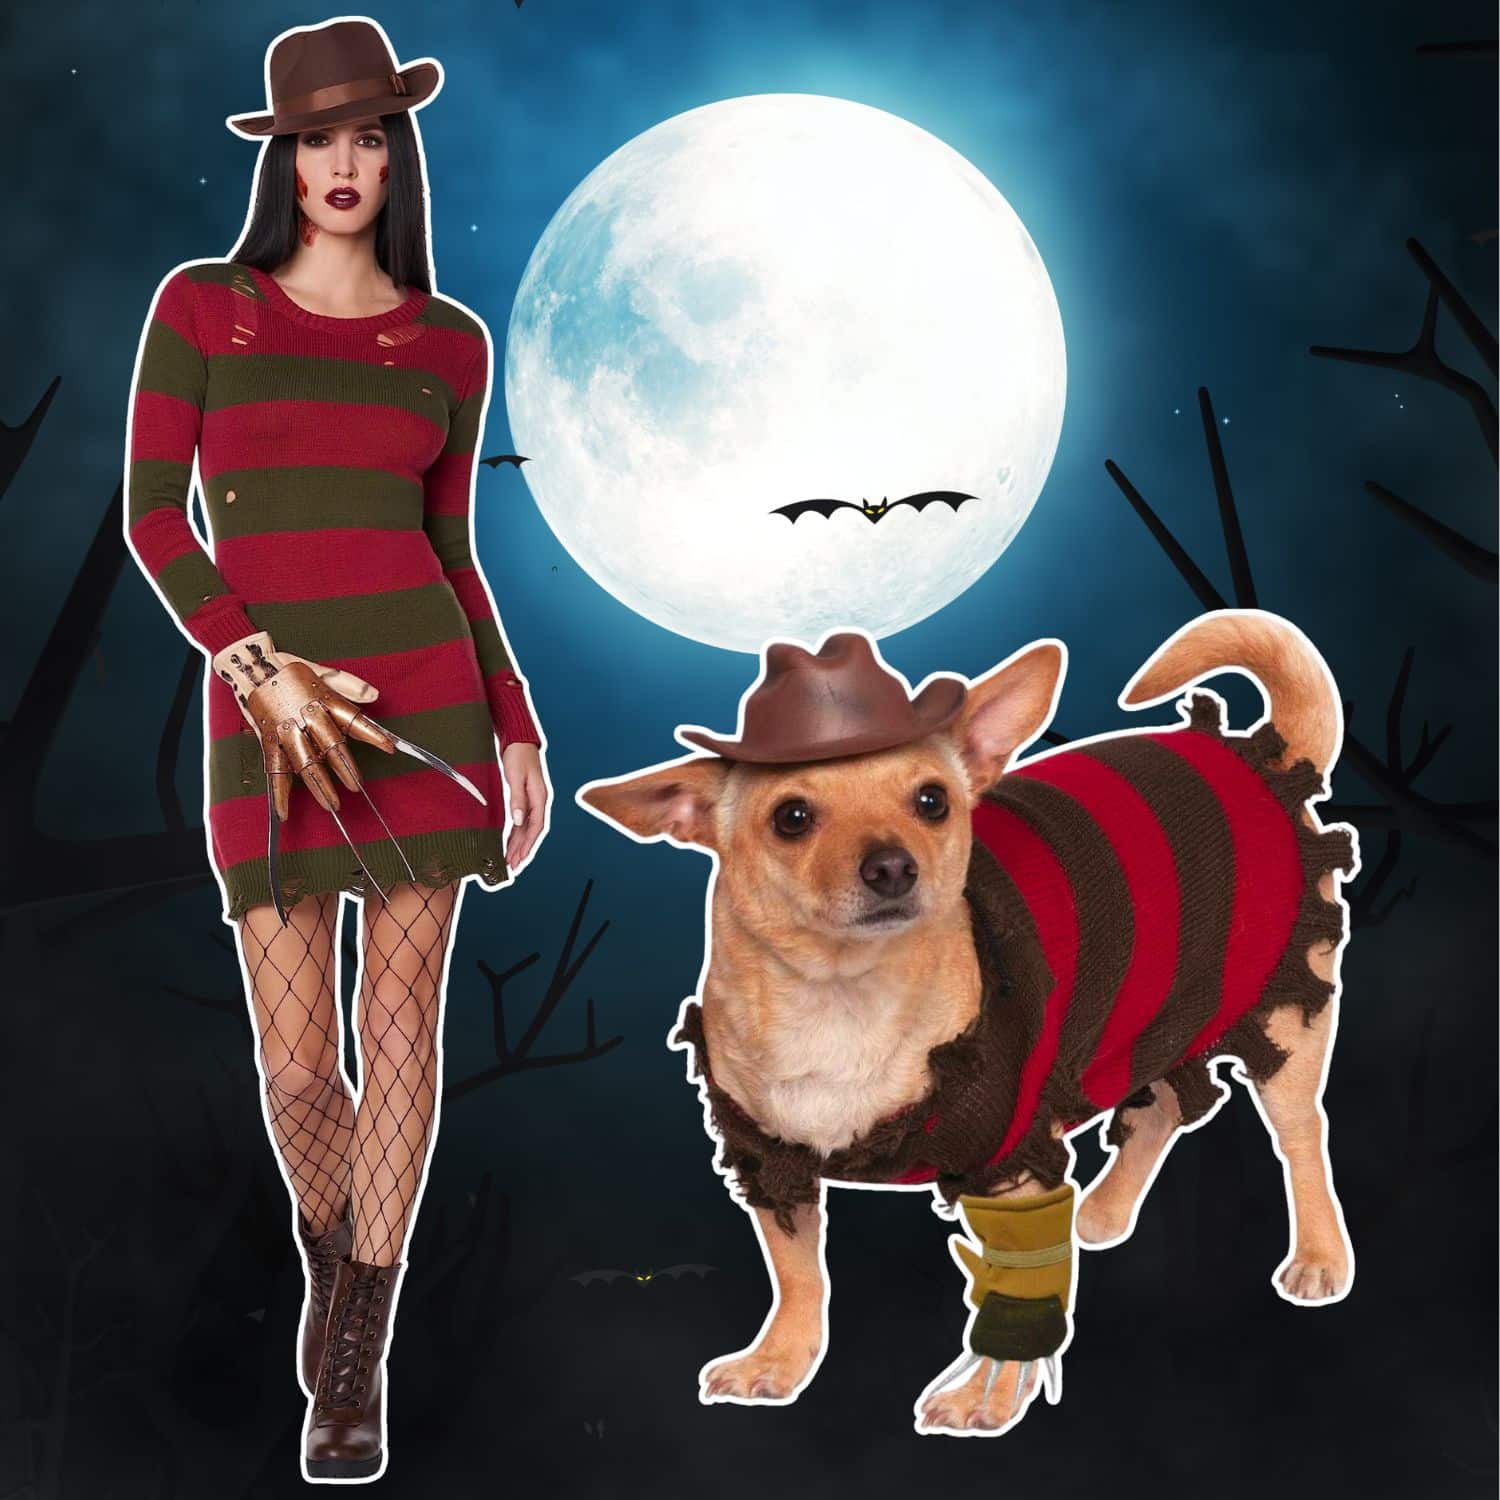 Dog And Owner Halloween Costumes Freddy Krueger - Dog And Owner Halloween Costumes | Pawcool ™